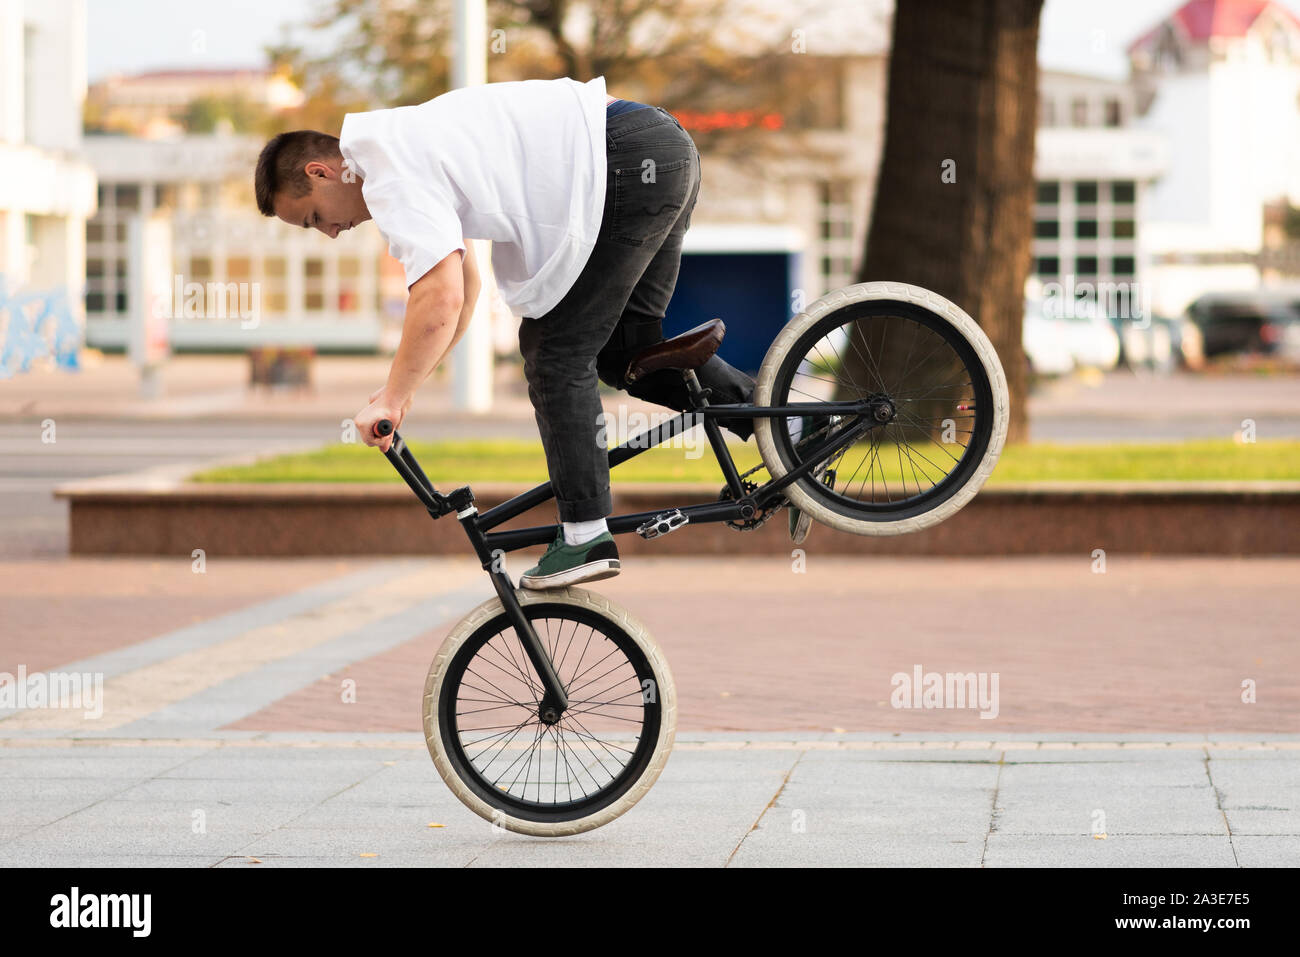 The guy on the BMX bike performs a trick on the front wheel Stock Photo -  Alamy